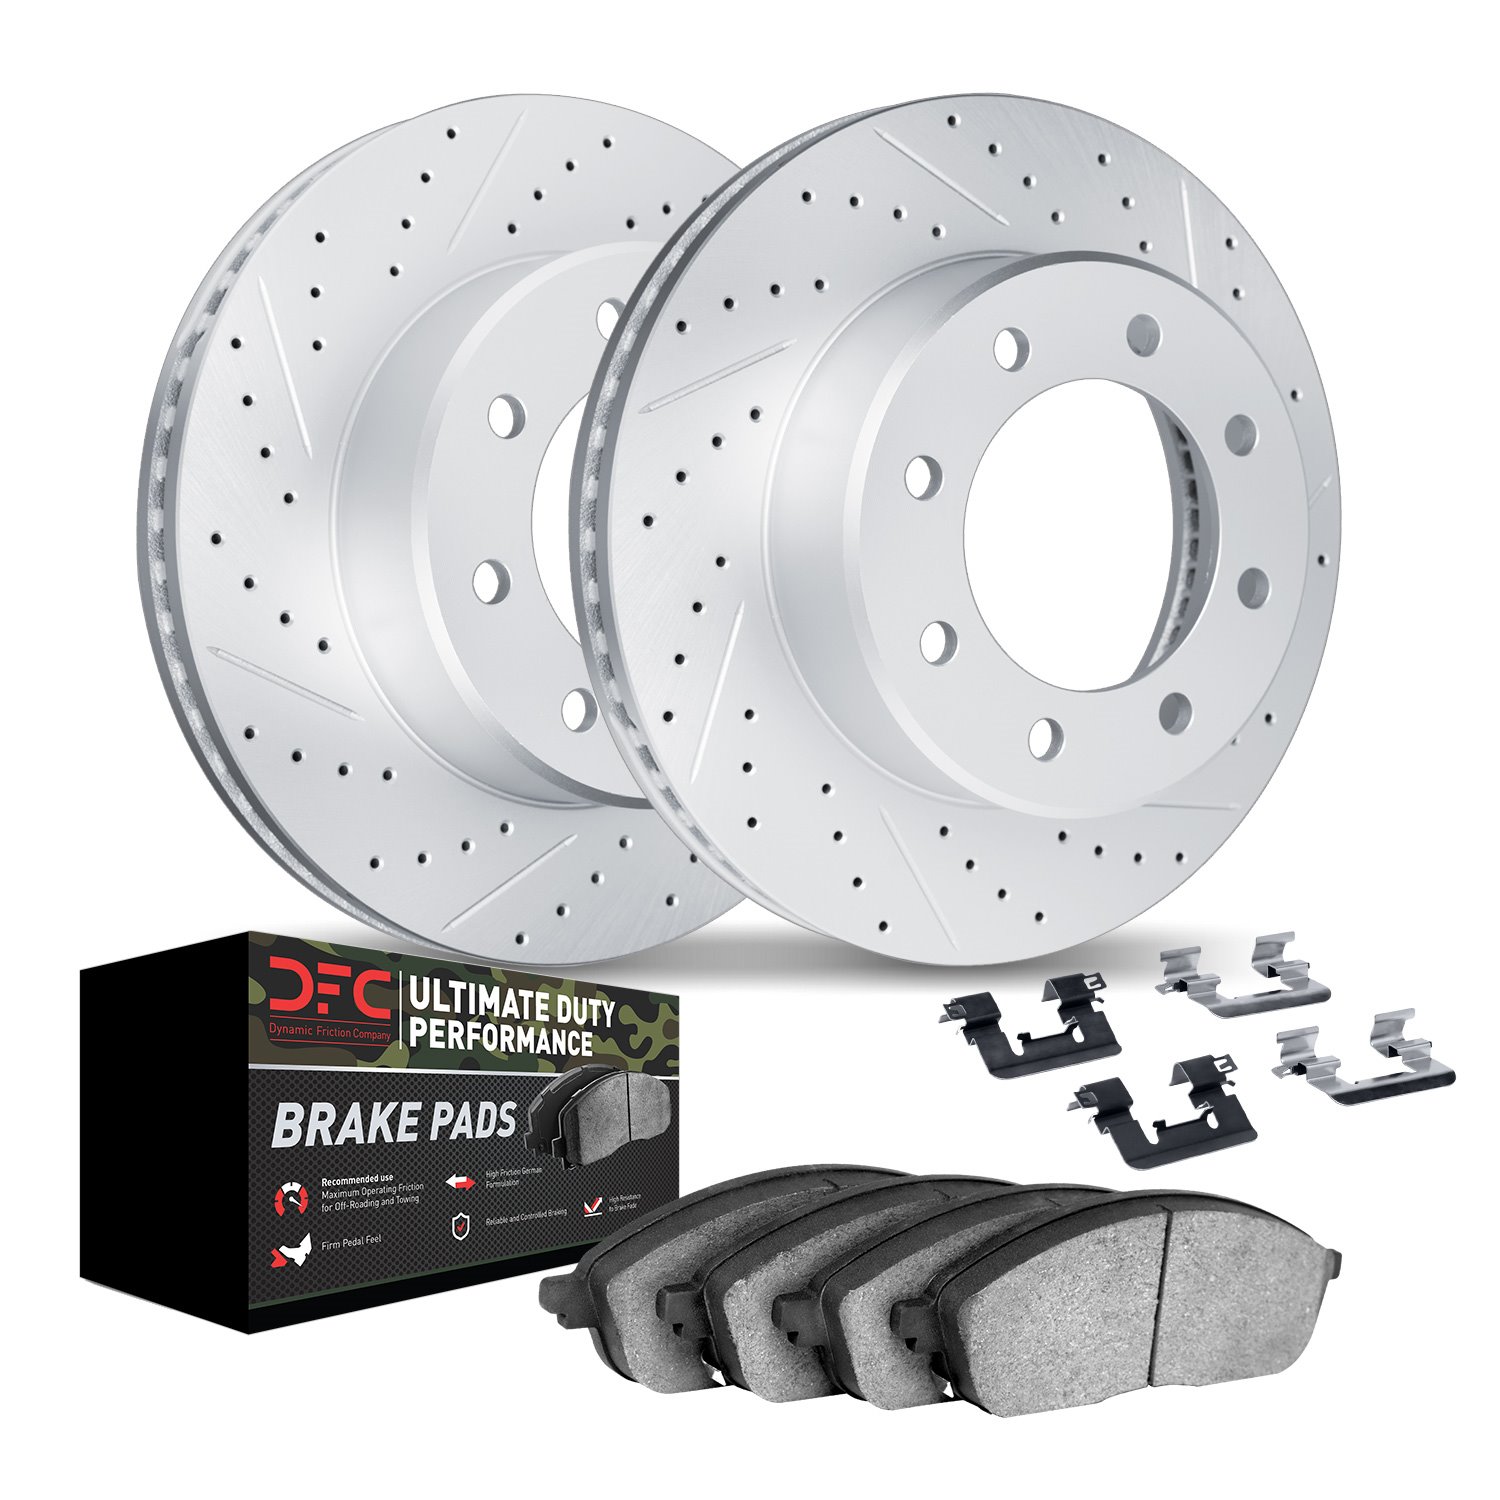 2412-54030 Geoperformance Drilled/Slotted Brake Rotors with Ultimate-Duty Brake Pads Kit & Hardware, 1999-2007 Ford/Lincoln/Merc